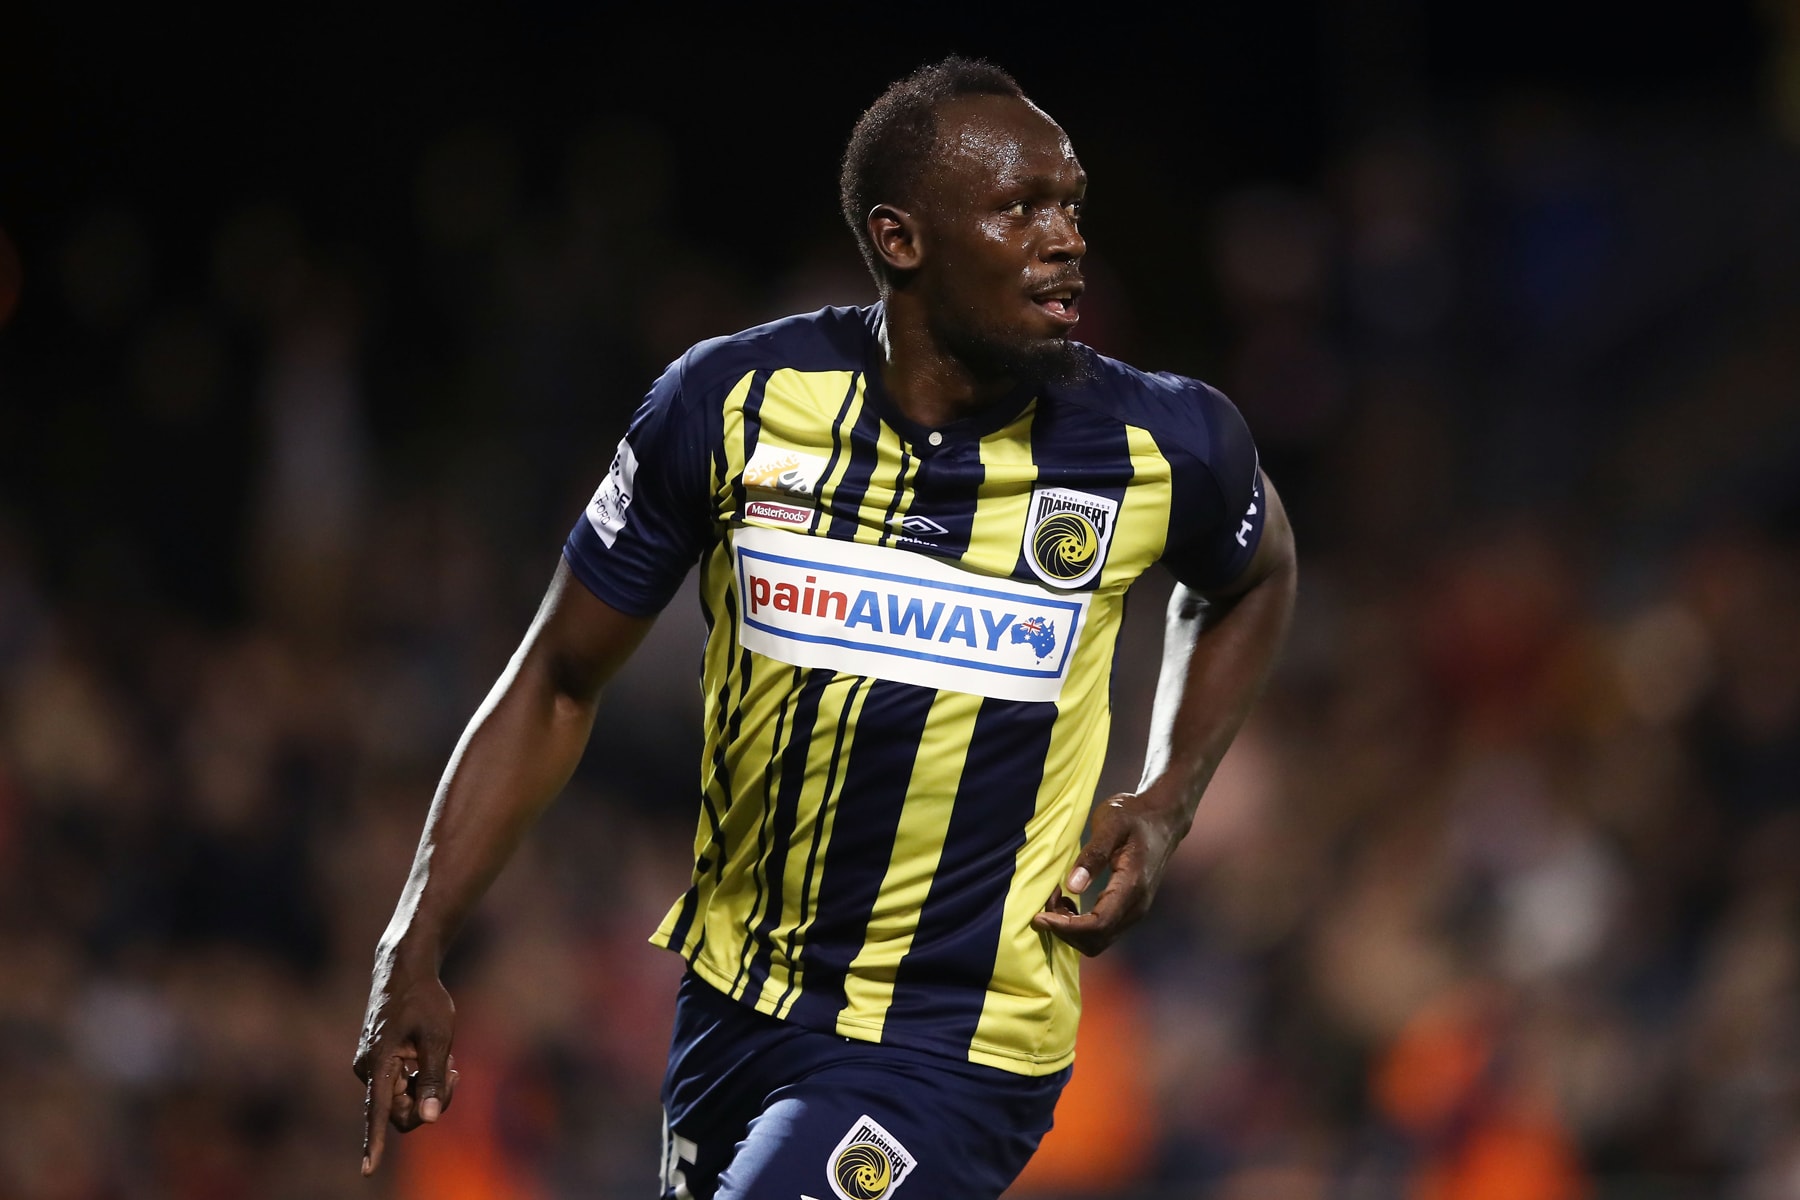 Usain Bolt Two Goals First Full Pro Soccer Match Central Coast Mariners Pre season unsigned Football